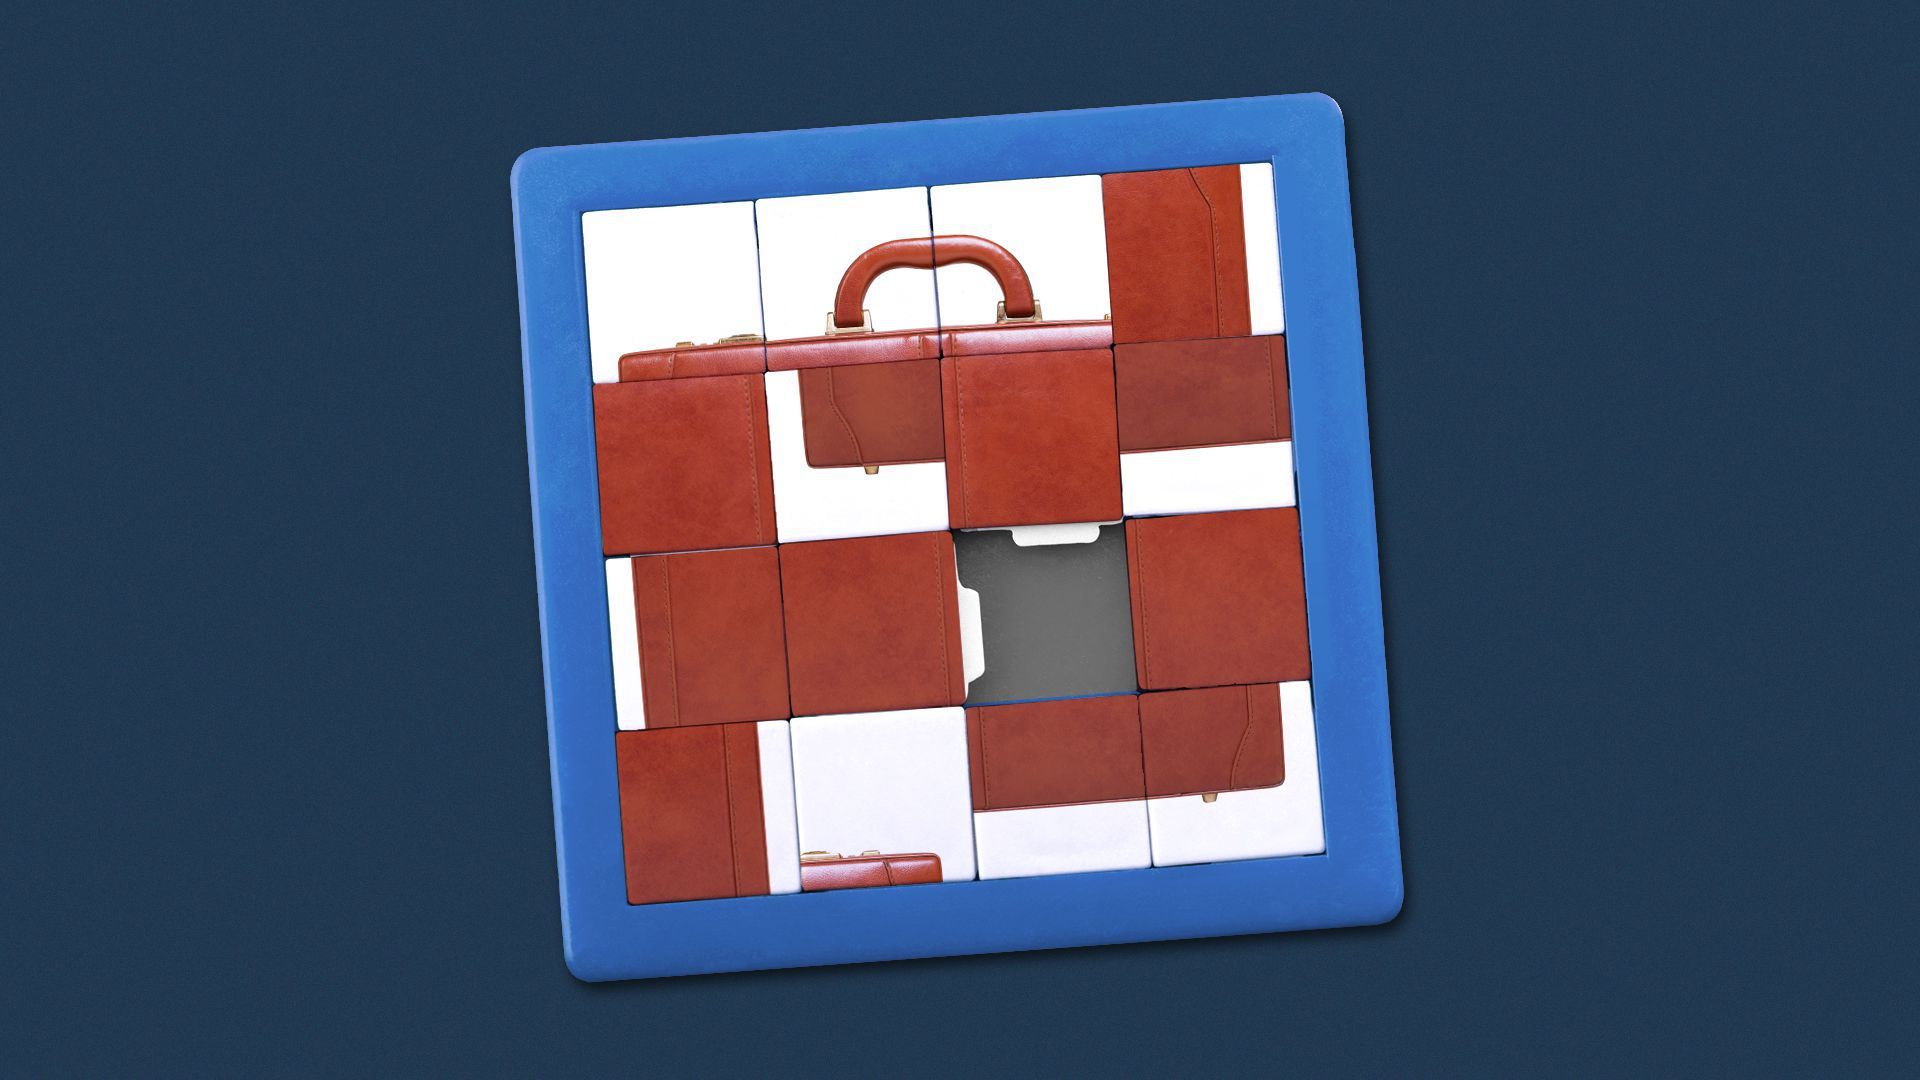 Illustration of a sliding puzzle of a briefcase.